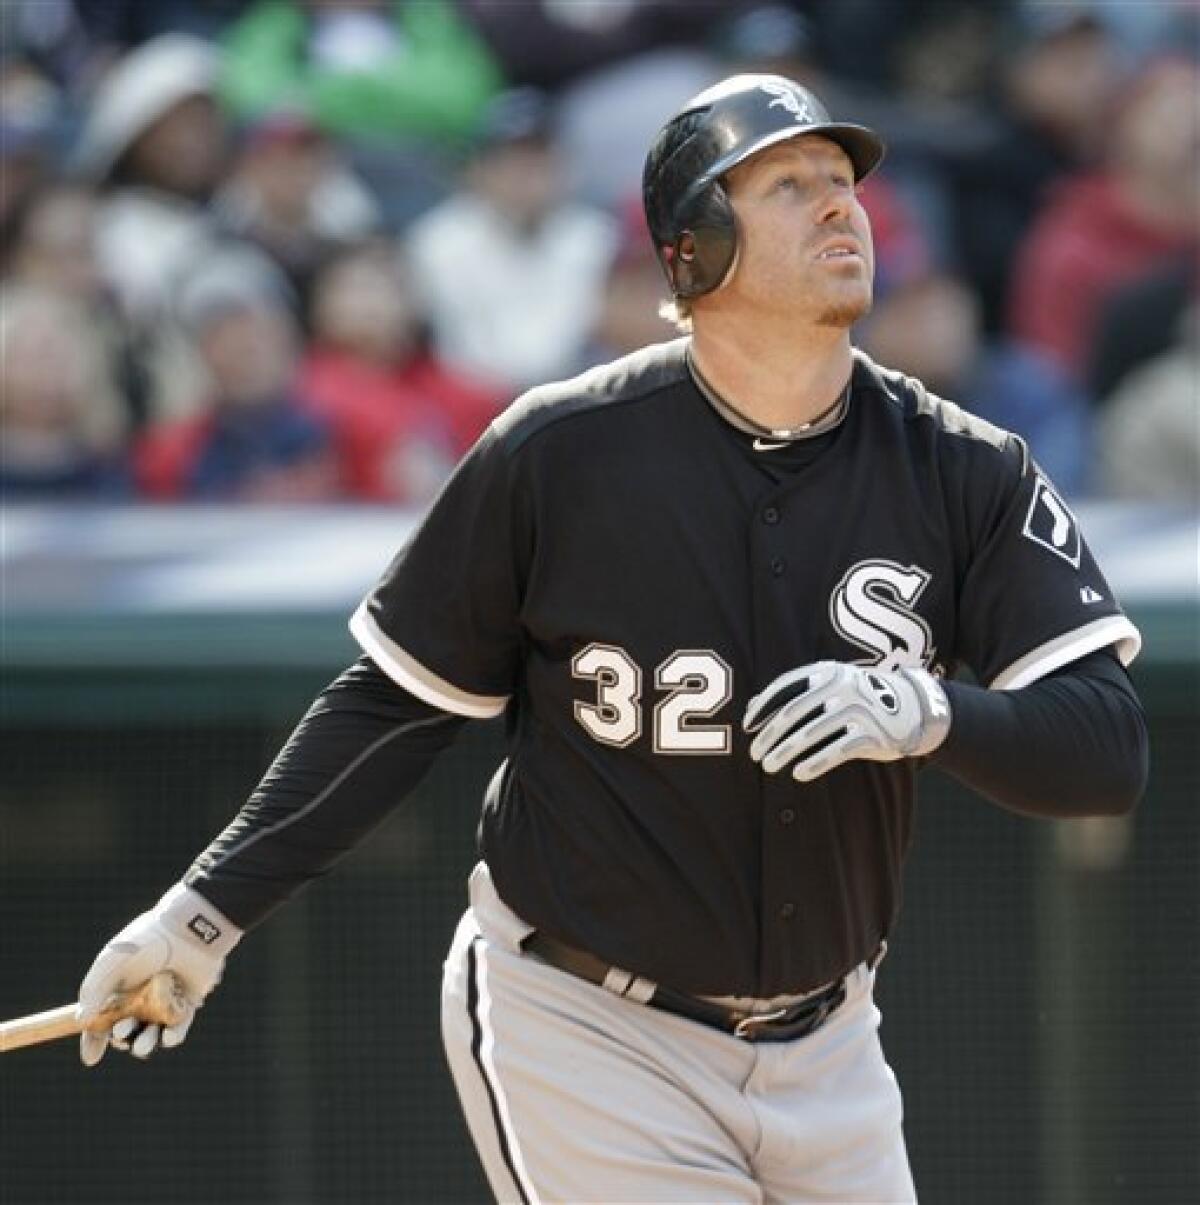 Slugger Dunn out for White Sox after surgery - The San Diego Union-Tribune